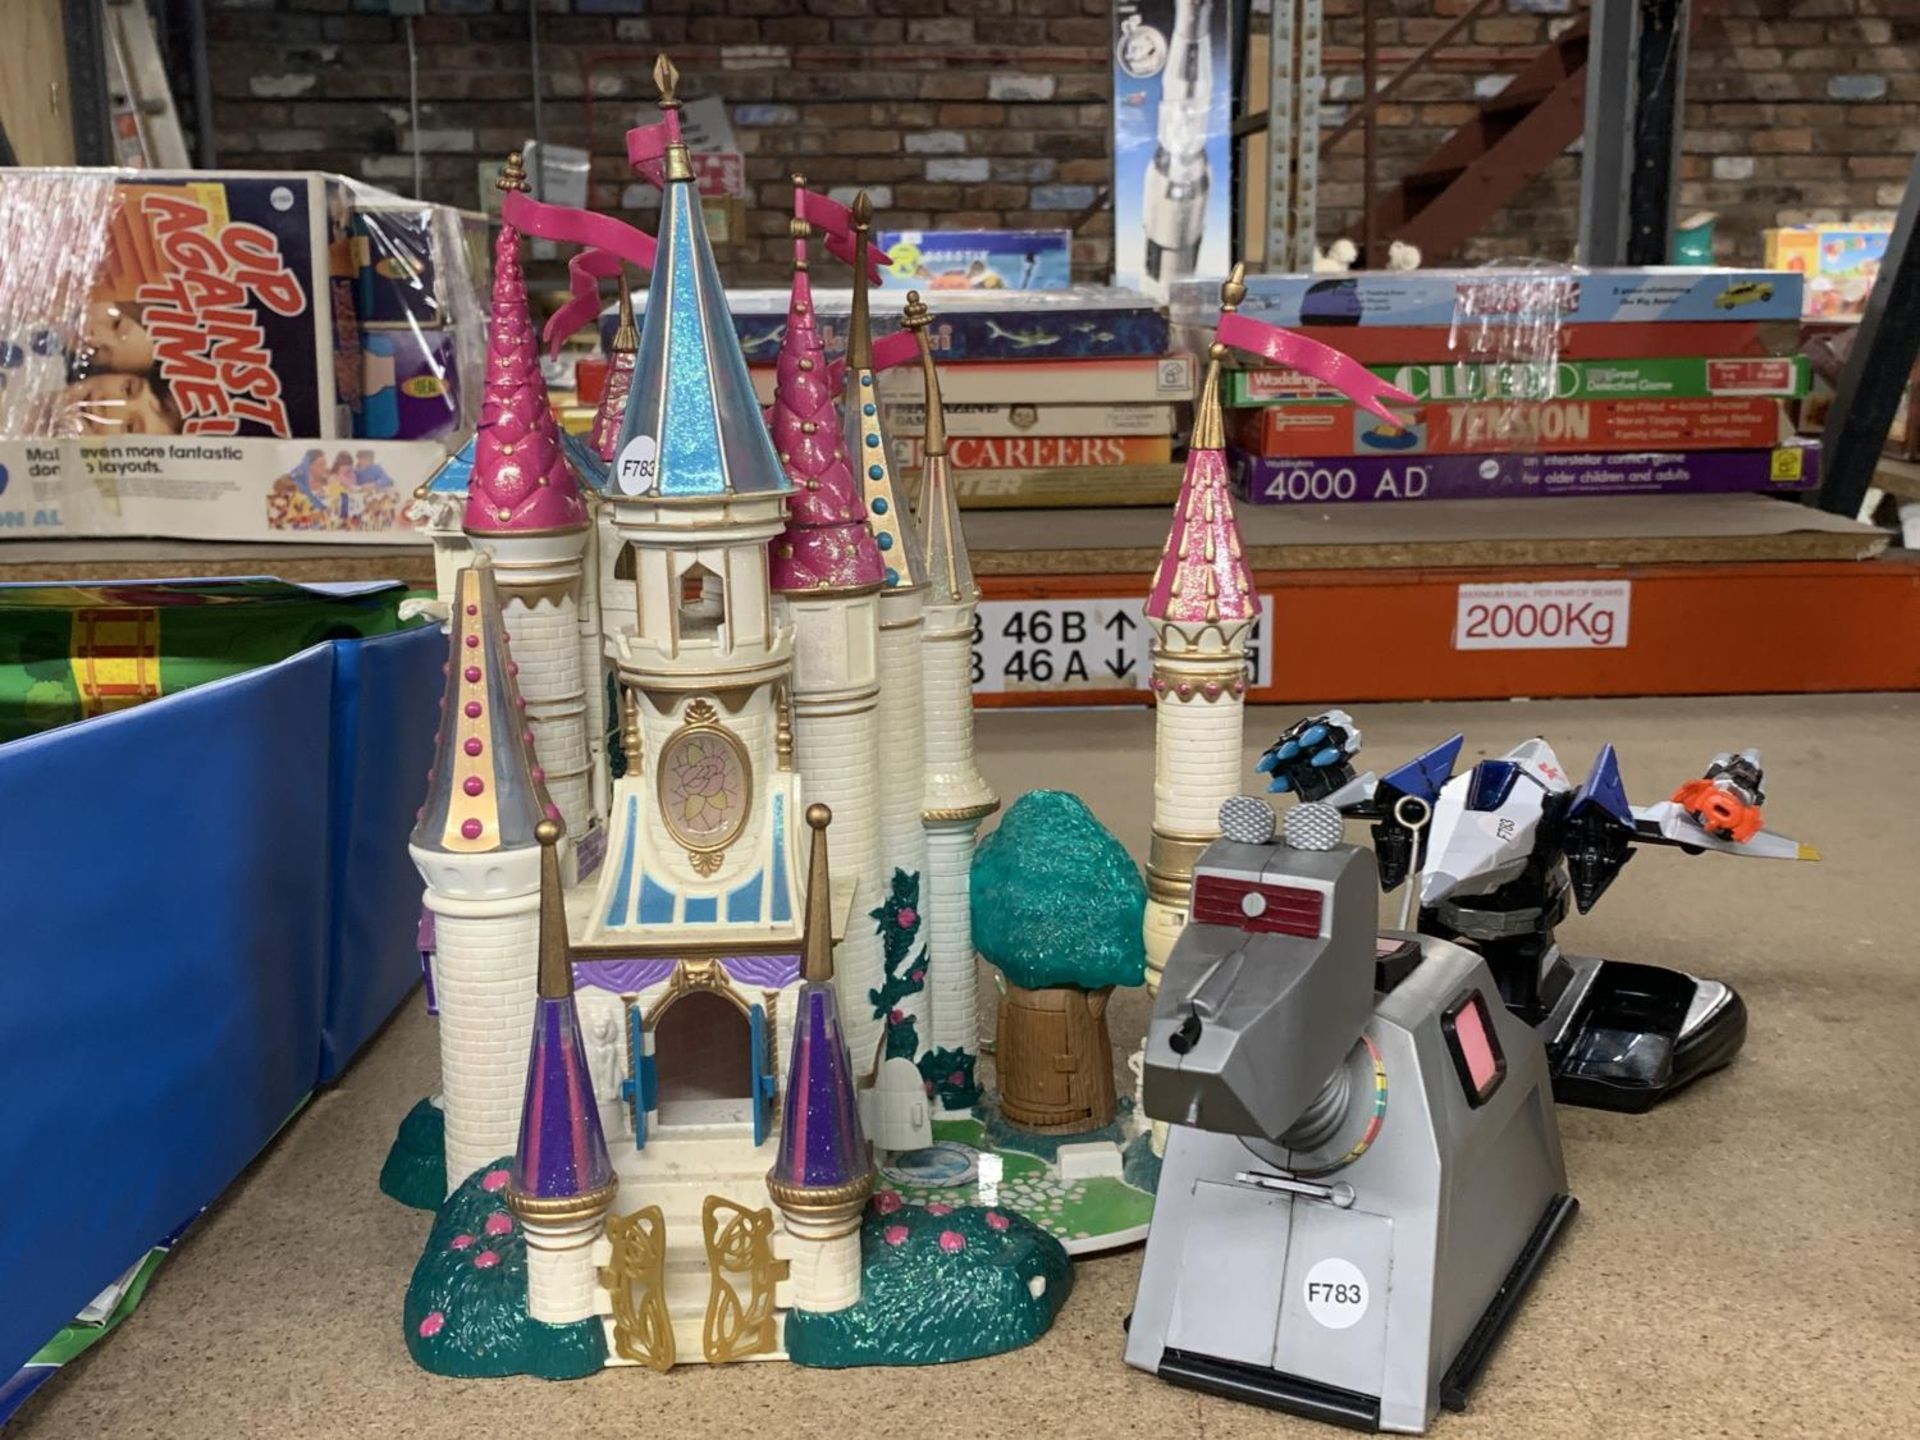 A PRINCESS CASTLE, DR WHO K-9 AND A SPACE SHIP